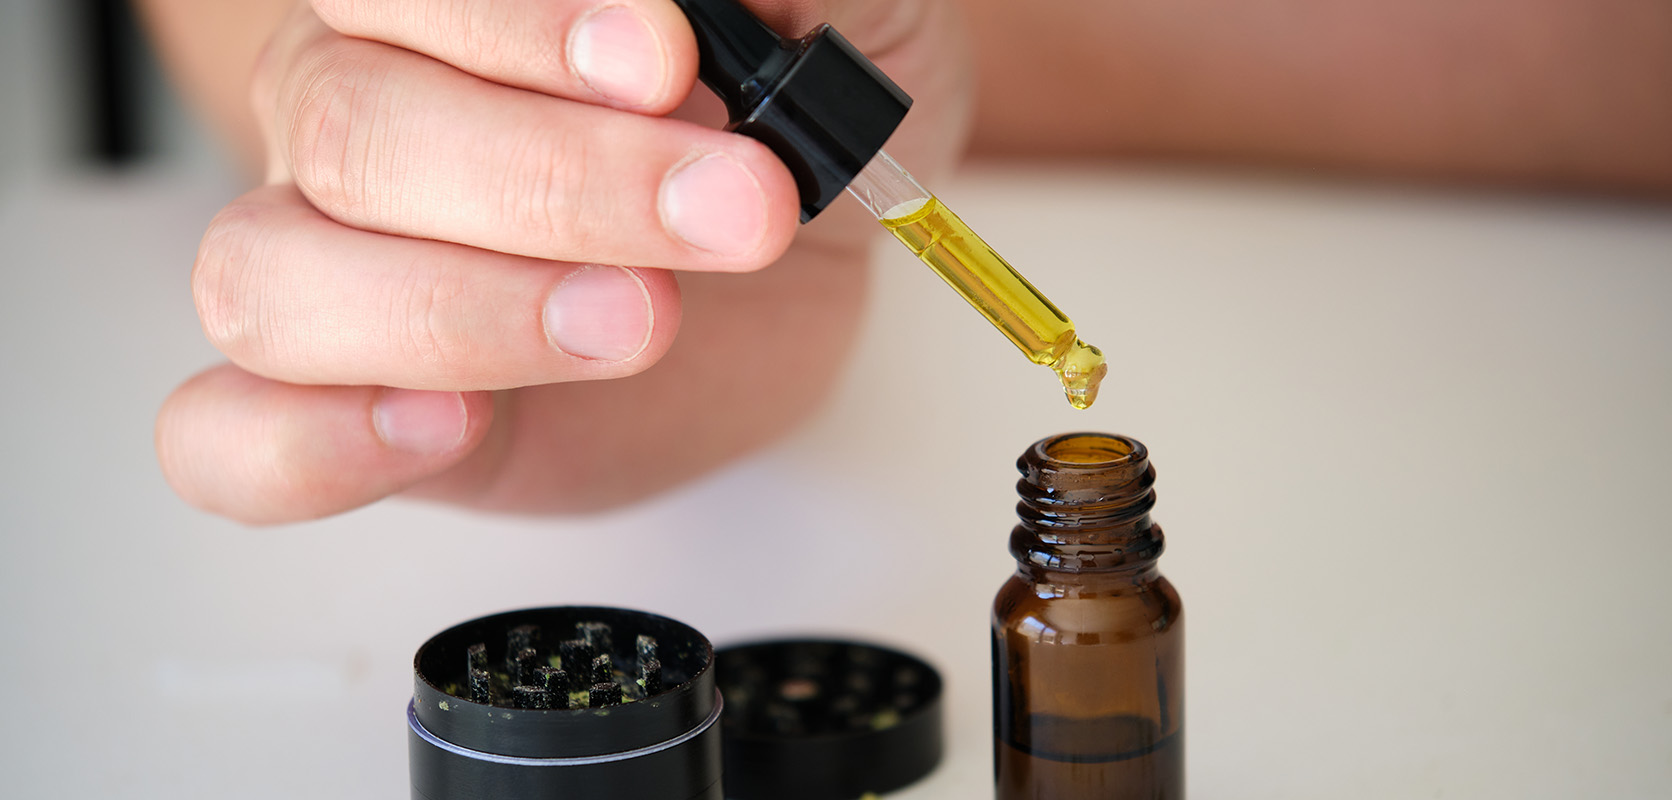 dosing cannabis oil with a pipette. online dispensary. budget buds. mail order marijuana. dispensary weed. buy weed online Canada.